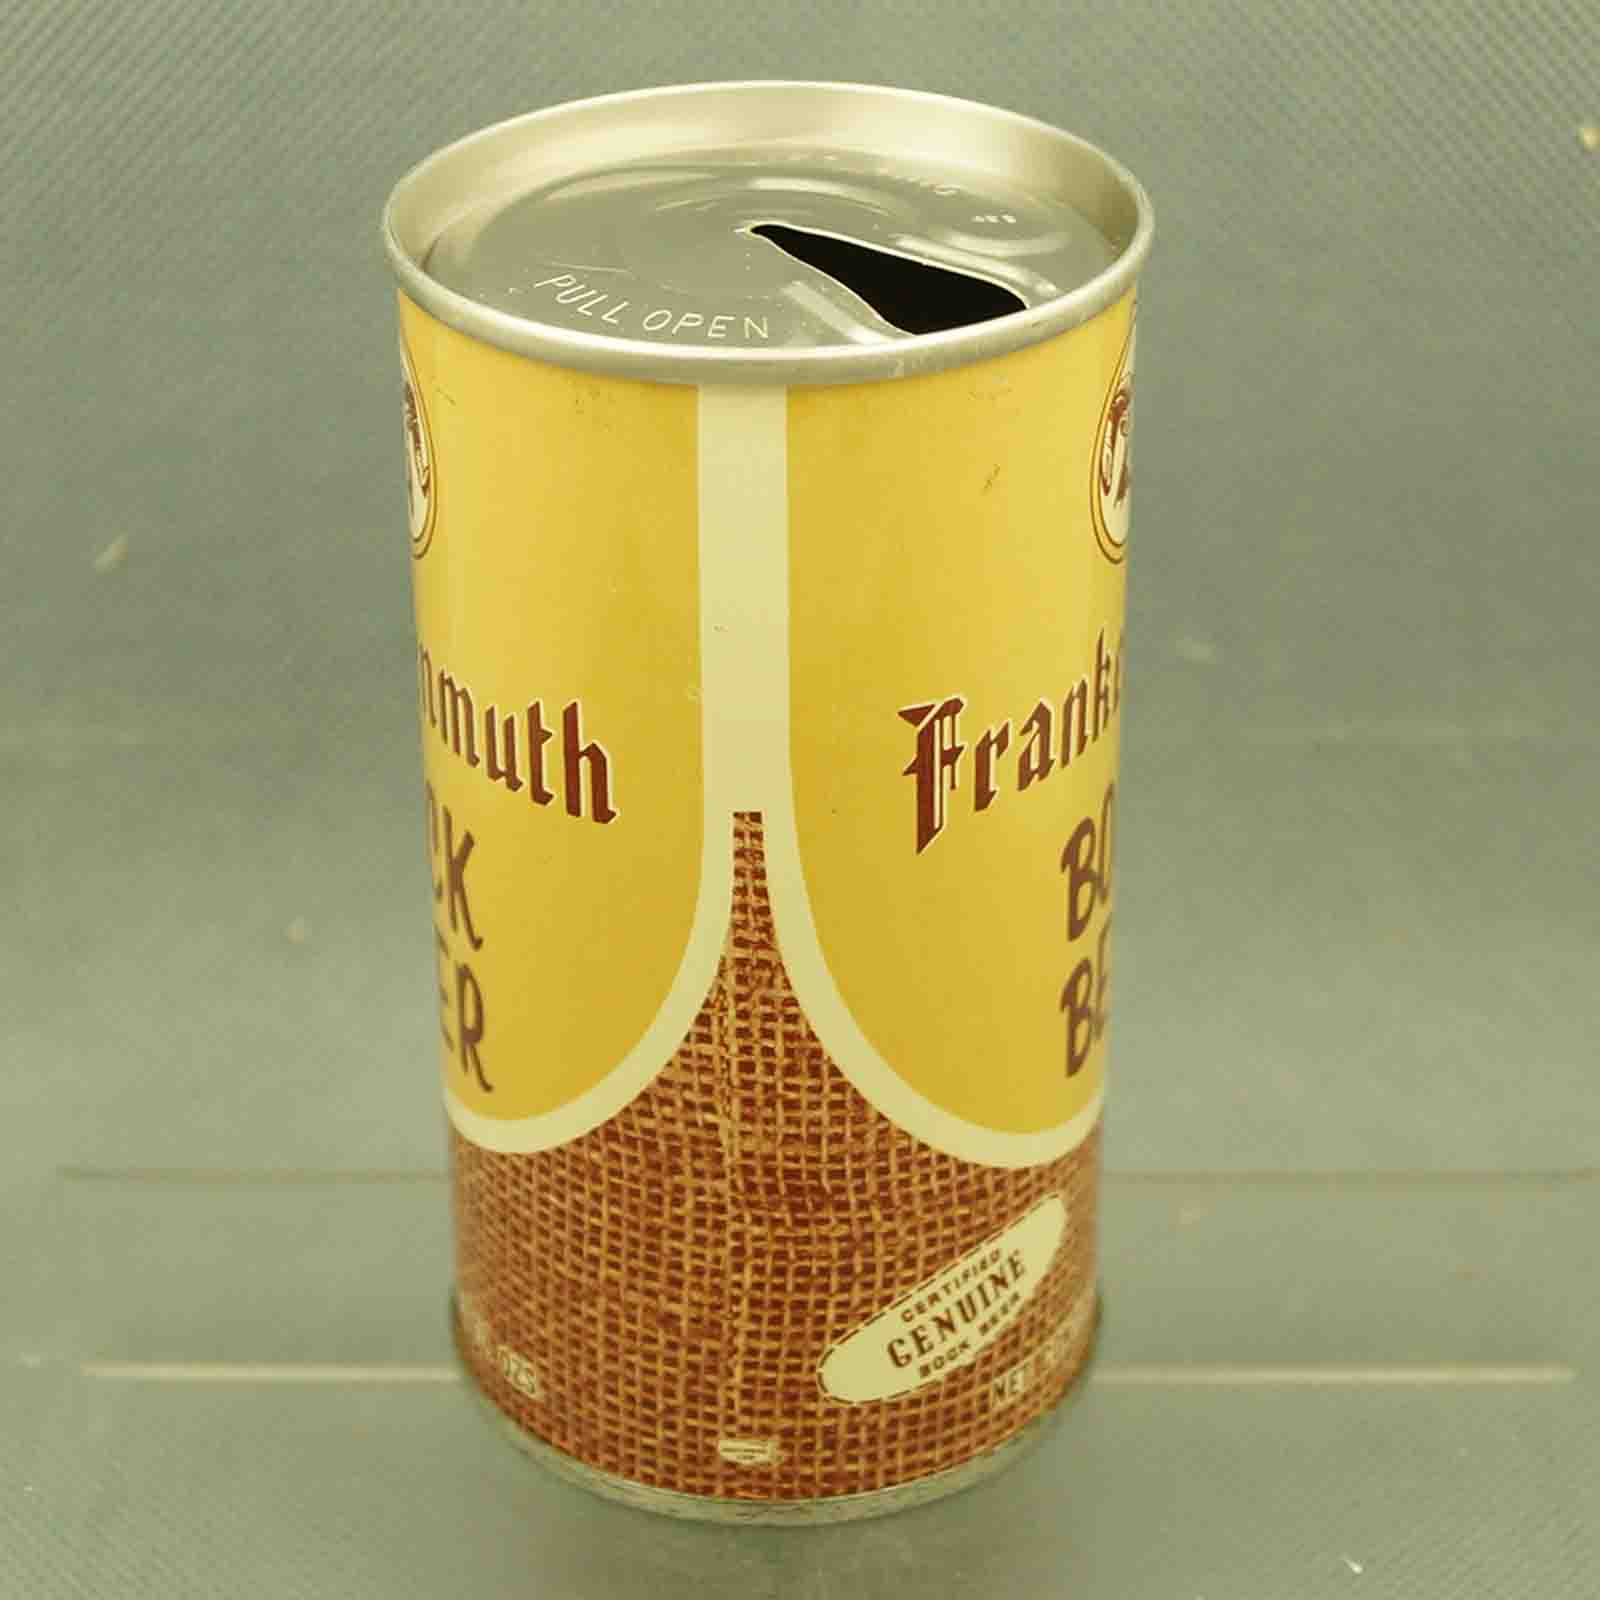 frankenmuth 66-12 pull tab beer can 2